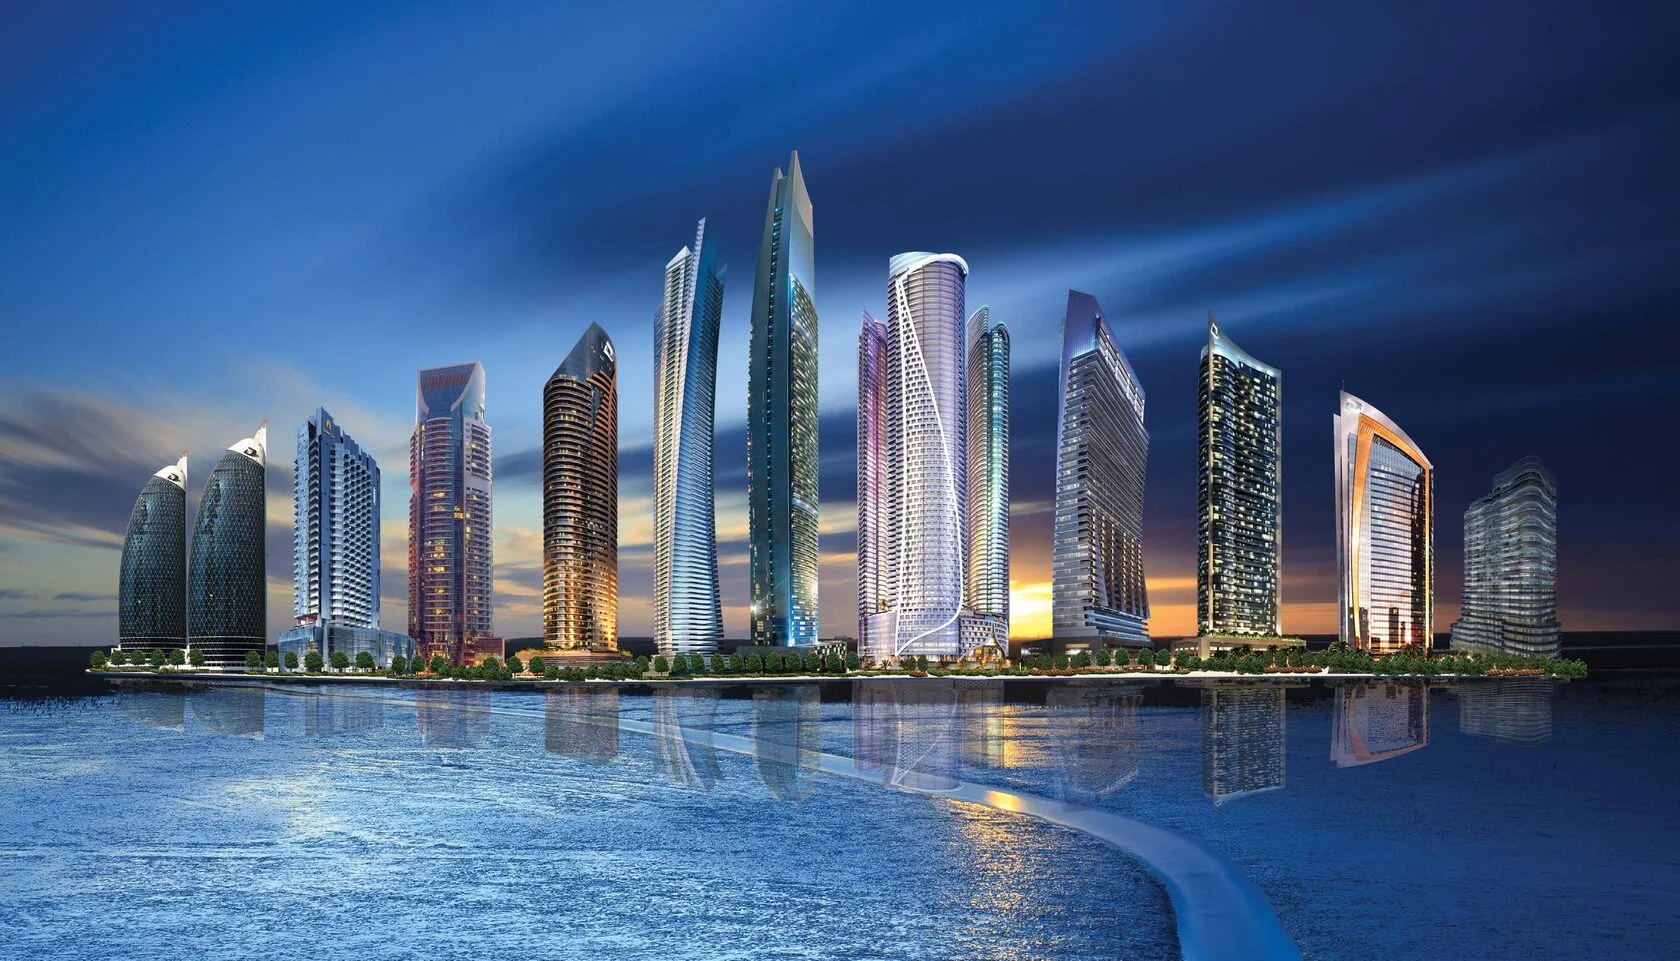 How to know information about Damac Properties